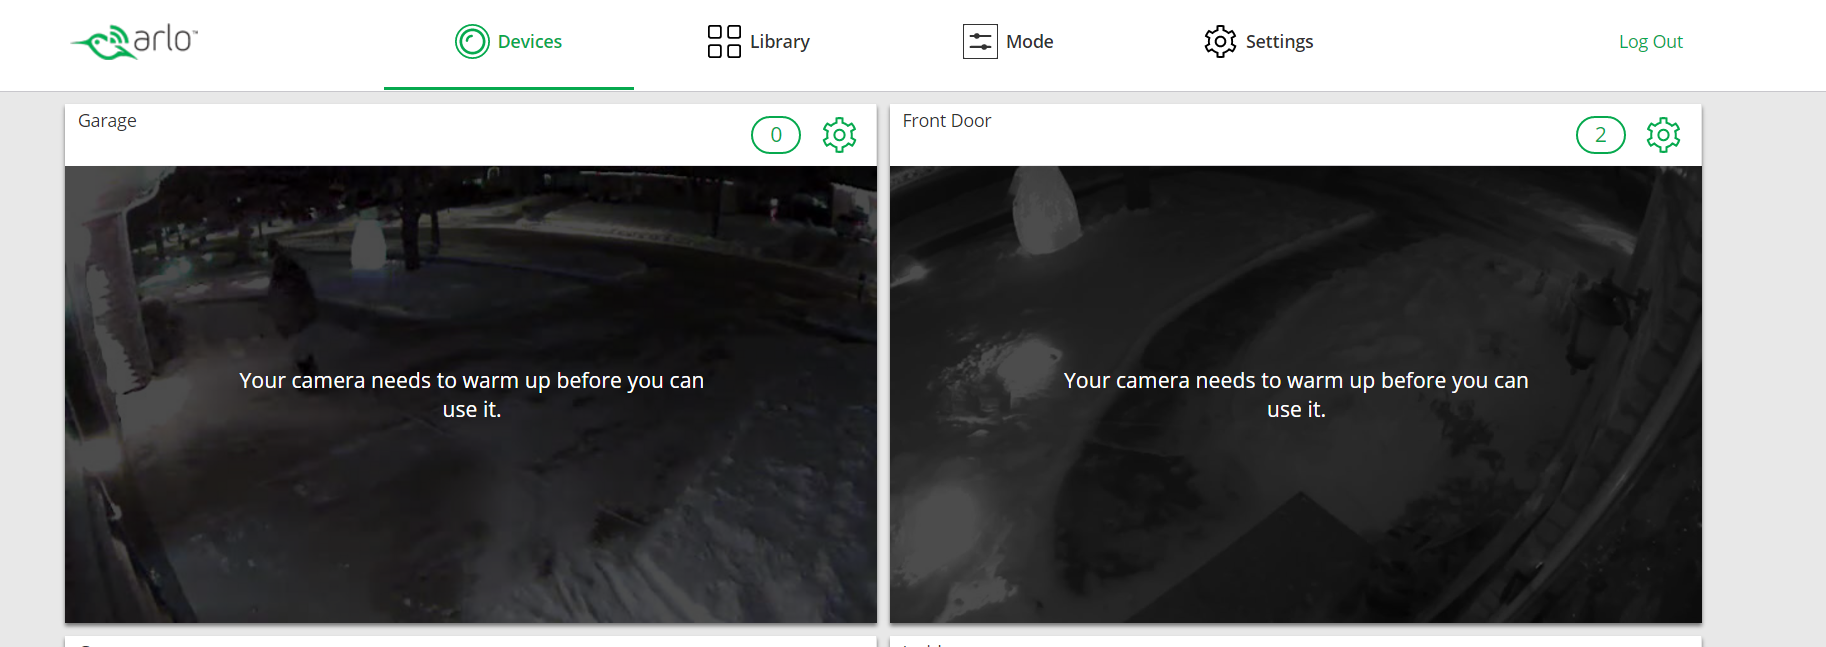 Arlo Pro Error on Cold Weather - Your 